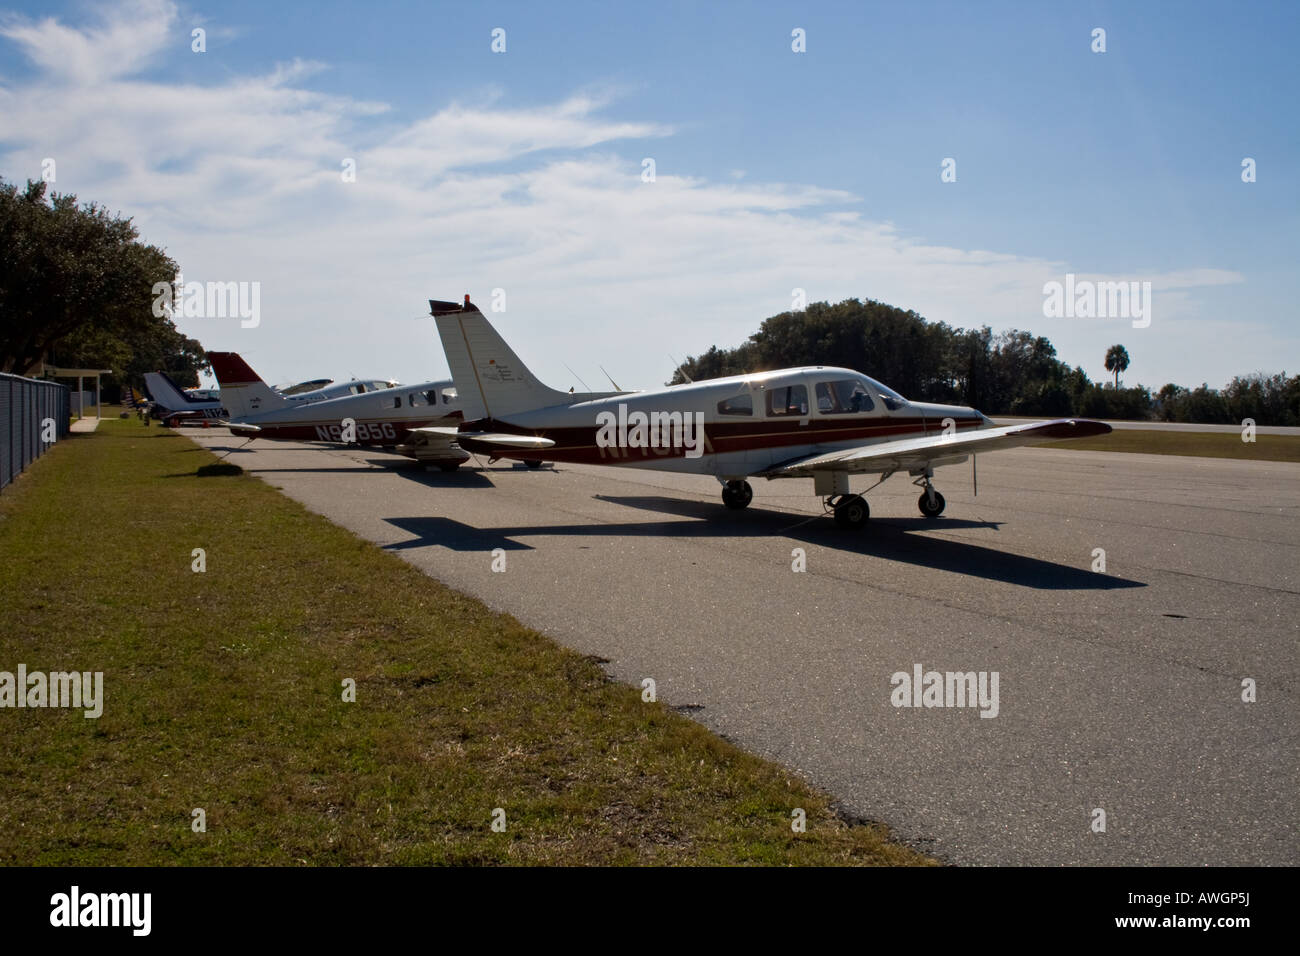 Line of small planes by the runway on a sunny day with wispy clouds in the sky Stock Photo